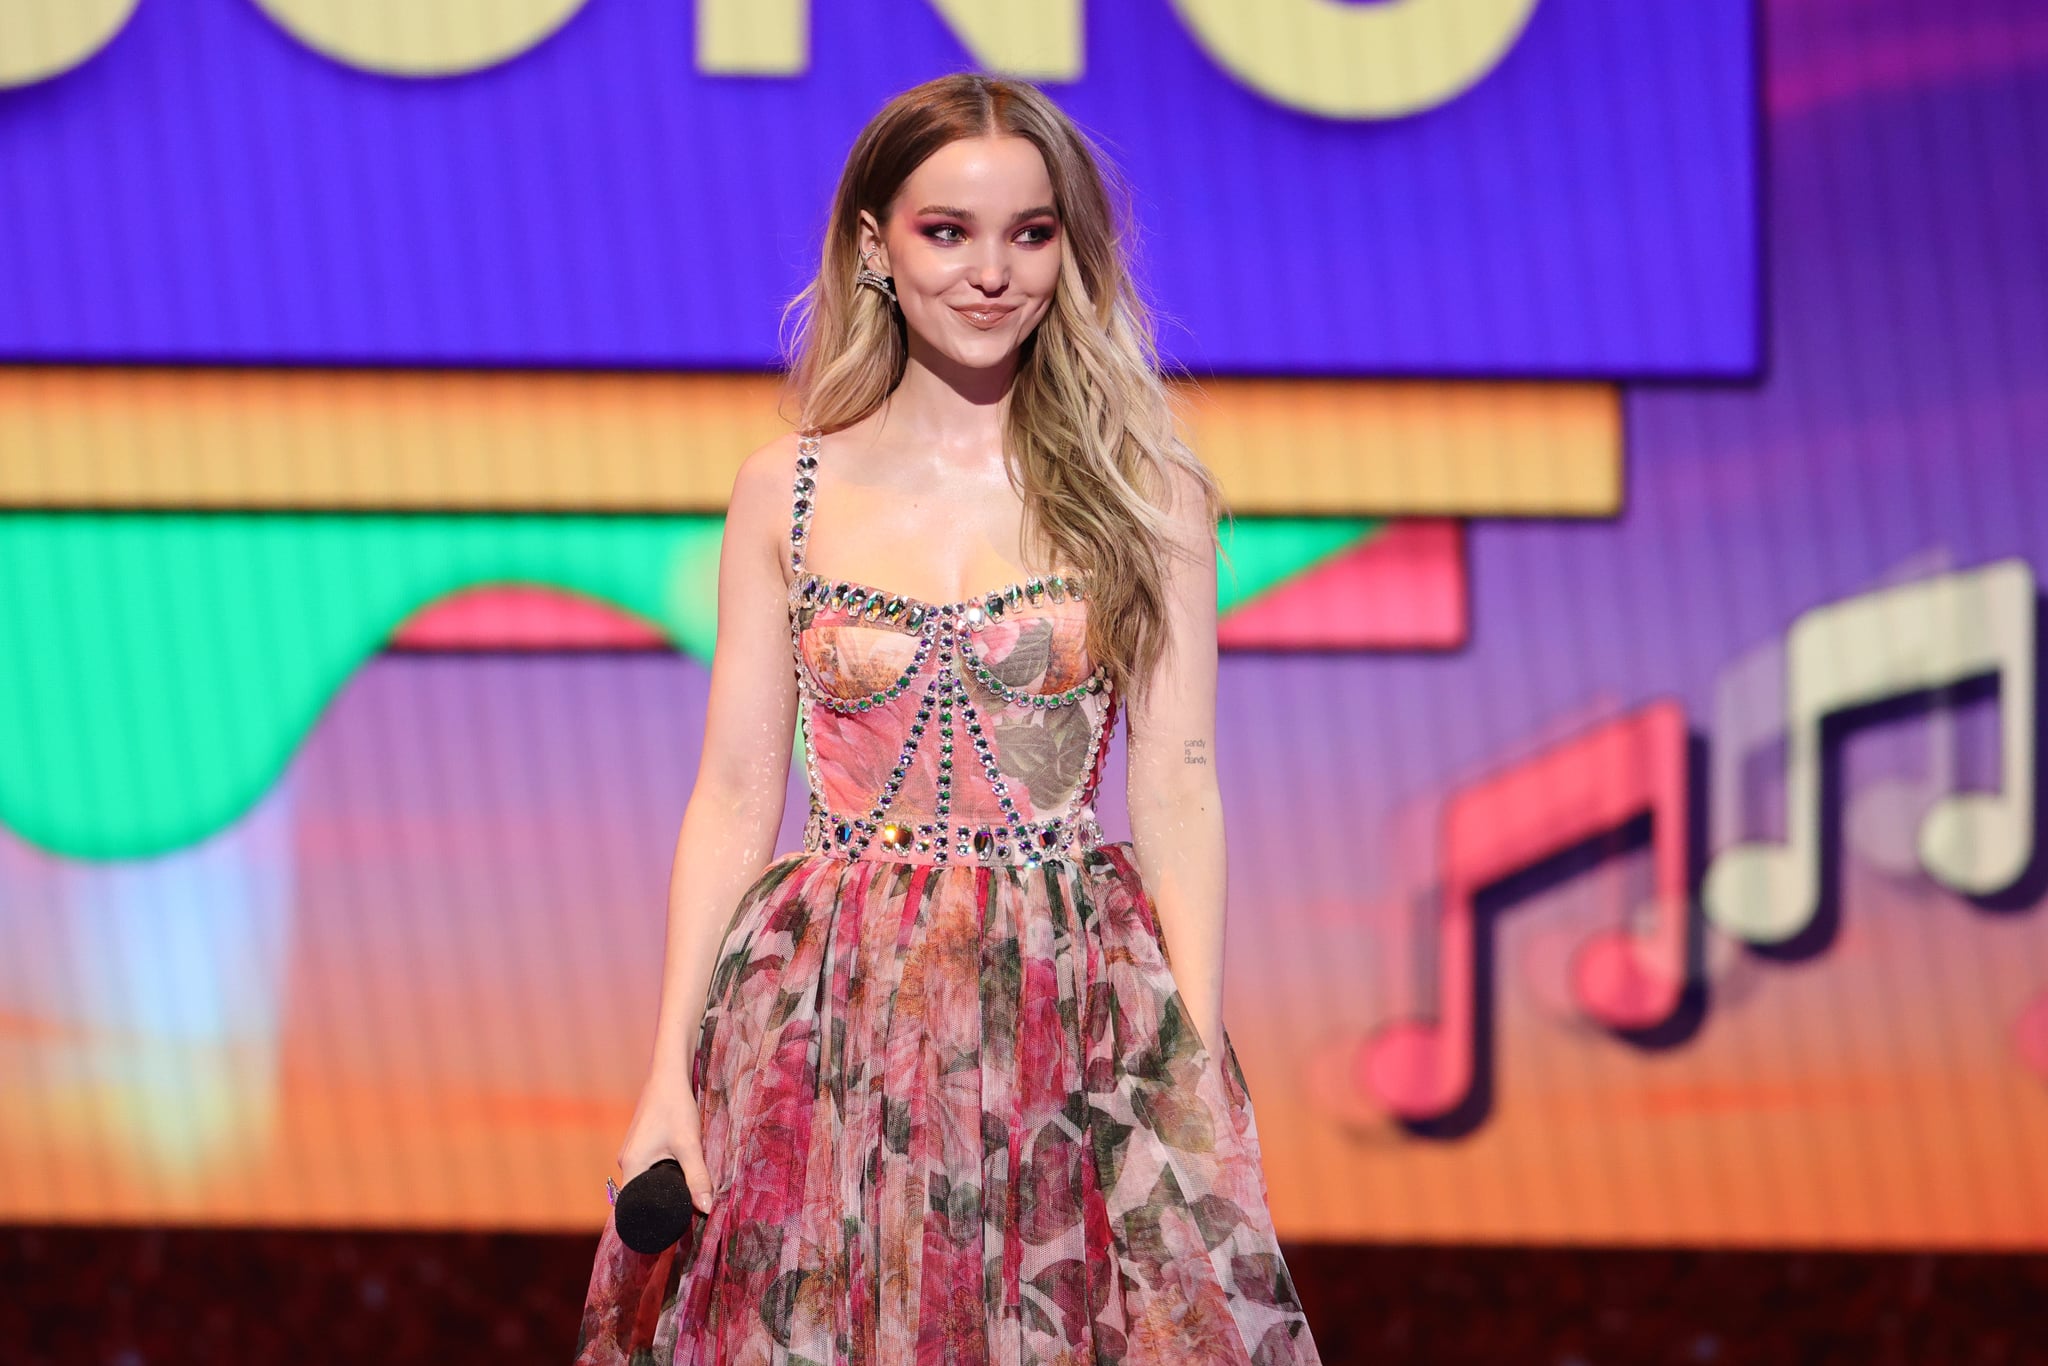 SANTA MONICA, CALIFORNIA - MARCH 13: In this image released on March 13, Dove Cameron speaks onstage during Nickelodeon's Kids' Choice Awards at Barker Hangar on March 13, 2021 in Santa Monica, California. (Photo by Rich Fury/KCA2021/Getty Images for Nickelodeon)